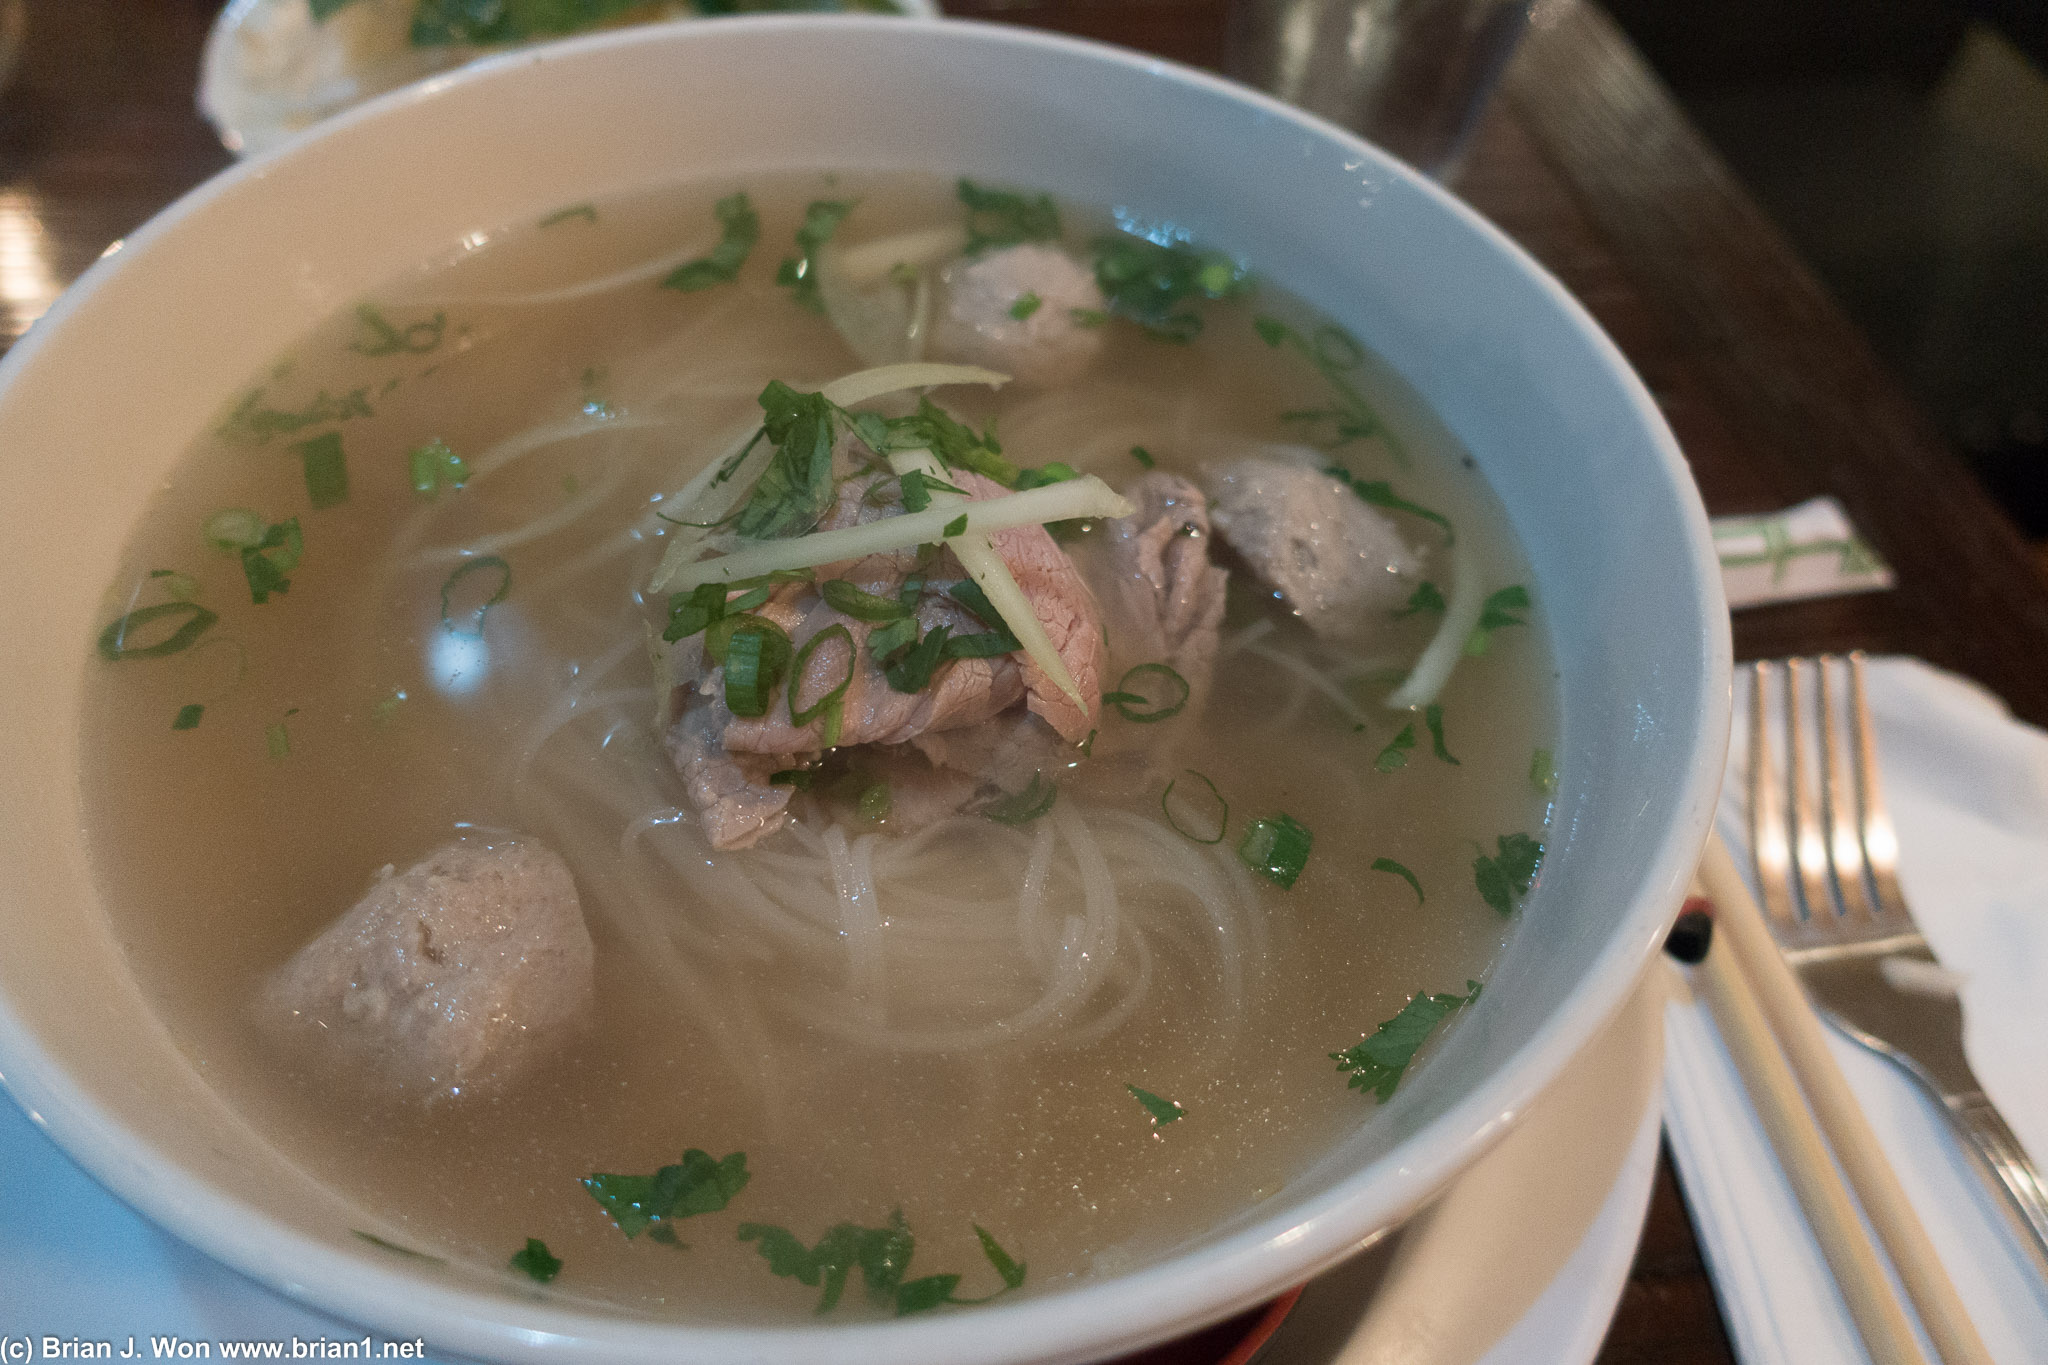 House special. Broth is a little plain. Beef ball, rare steak, but no tripe or tendon-- not even on the menu!